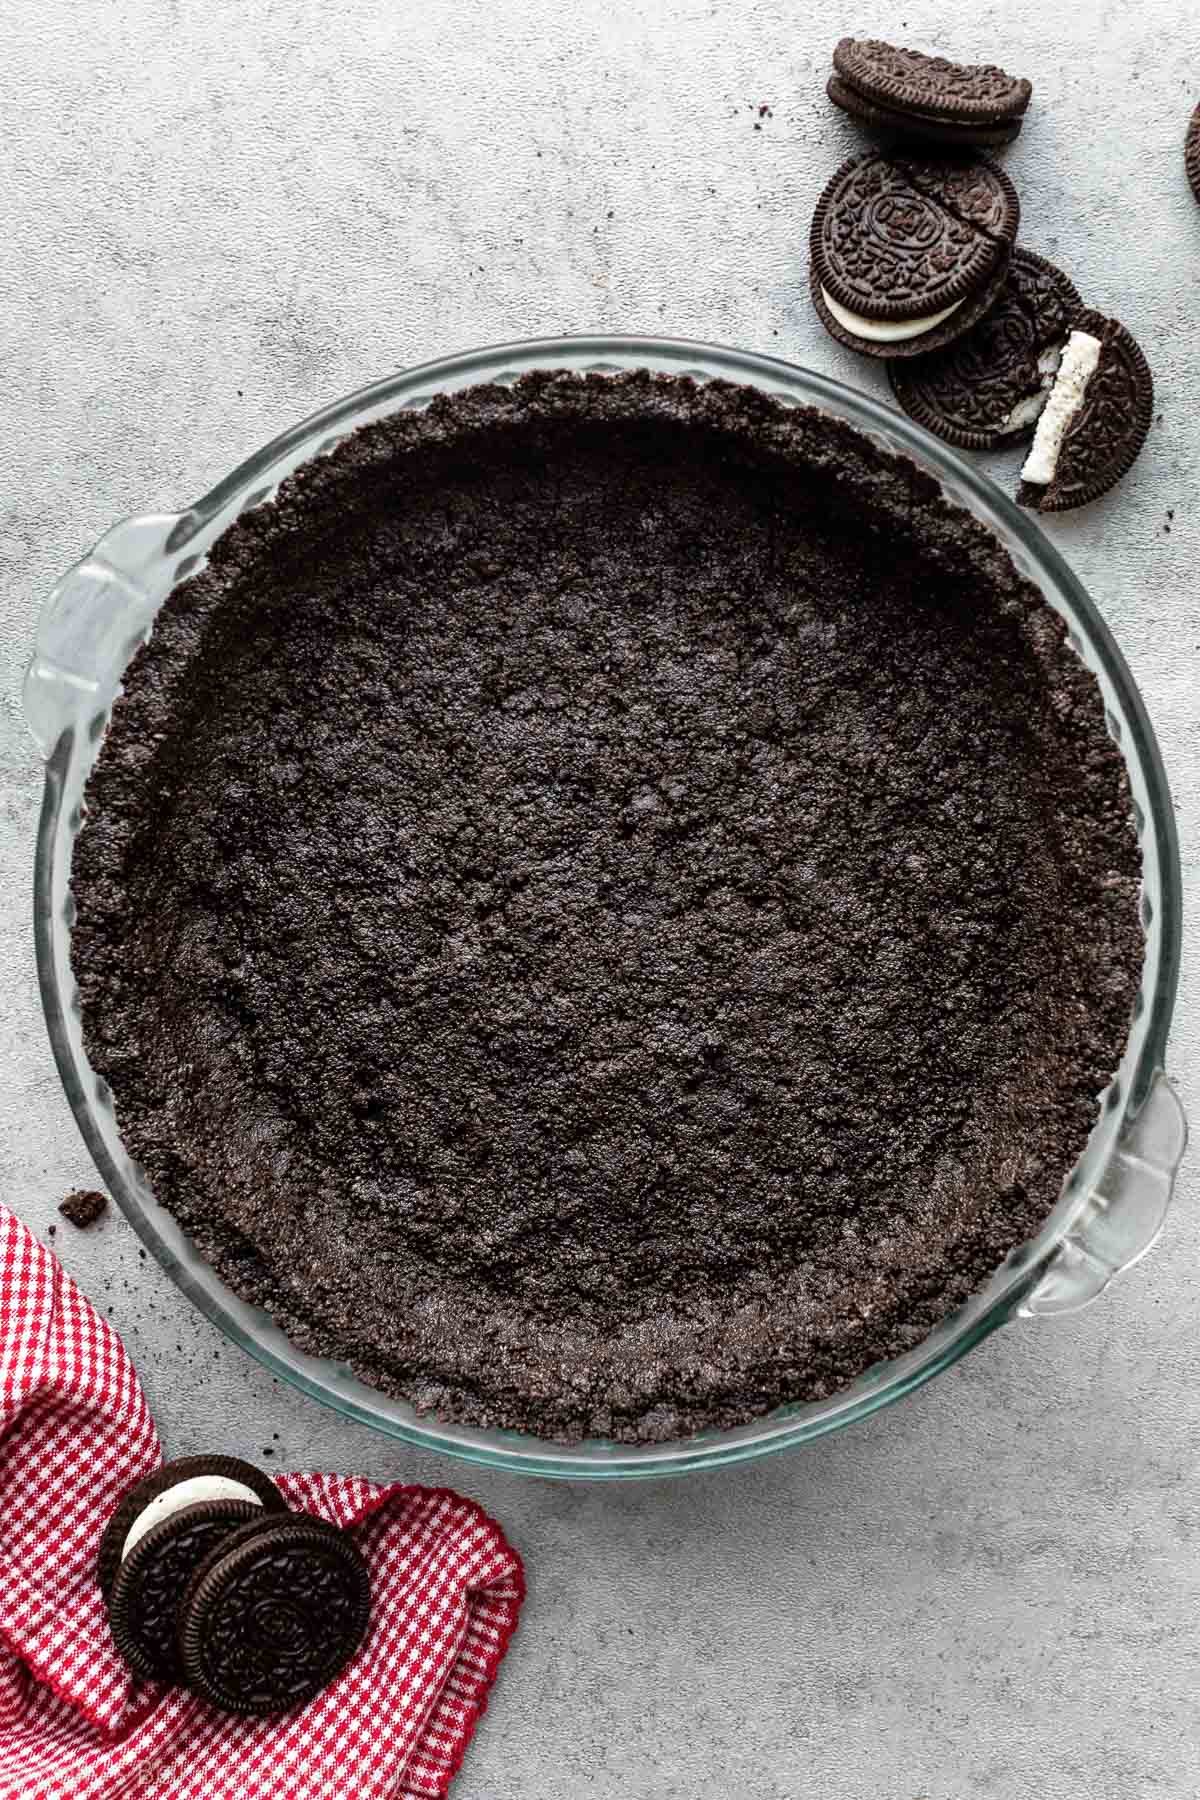 Oreo cookie crust pressed in glass pie dish on gray backdrop.